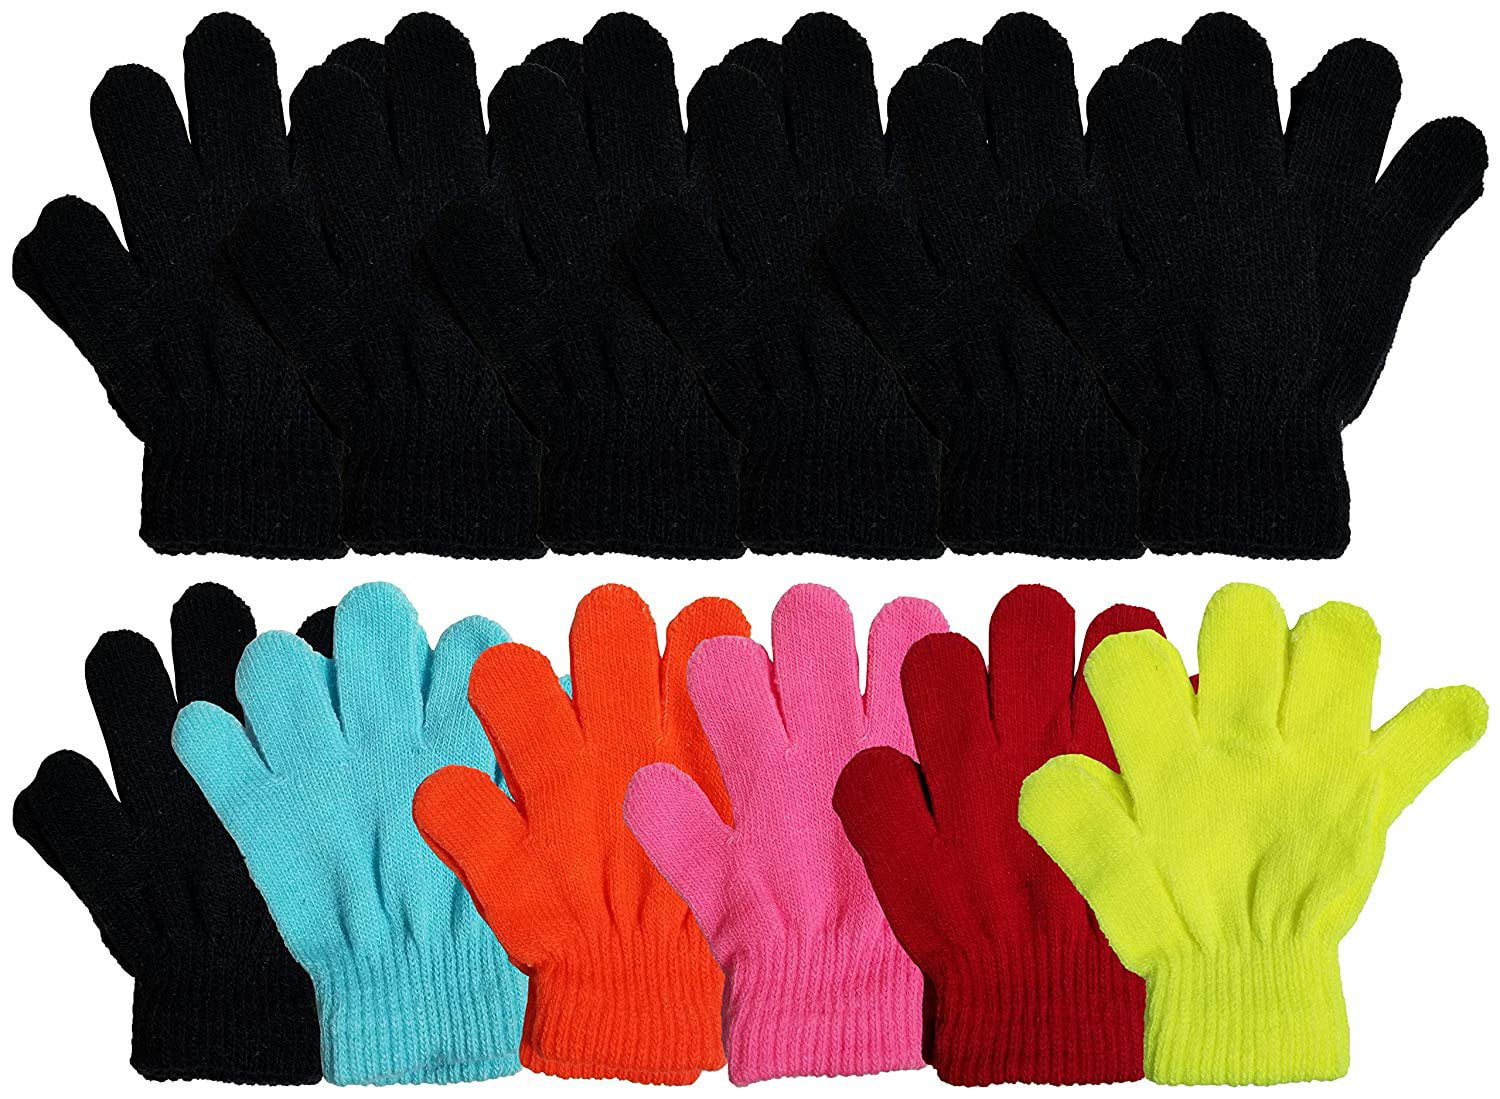 Bigger And Thicker New York Winter Gloves Magic Knit Gloves Wholesale 12 Pairs 